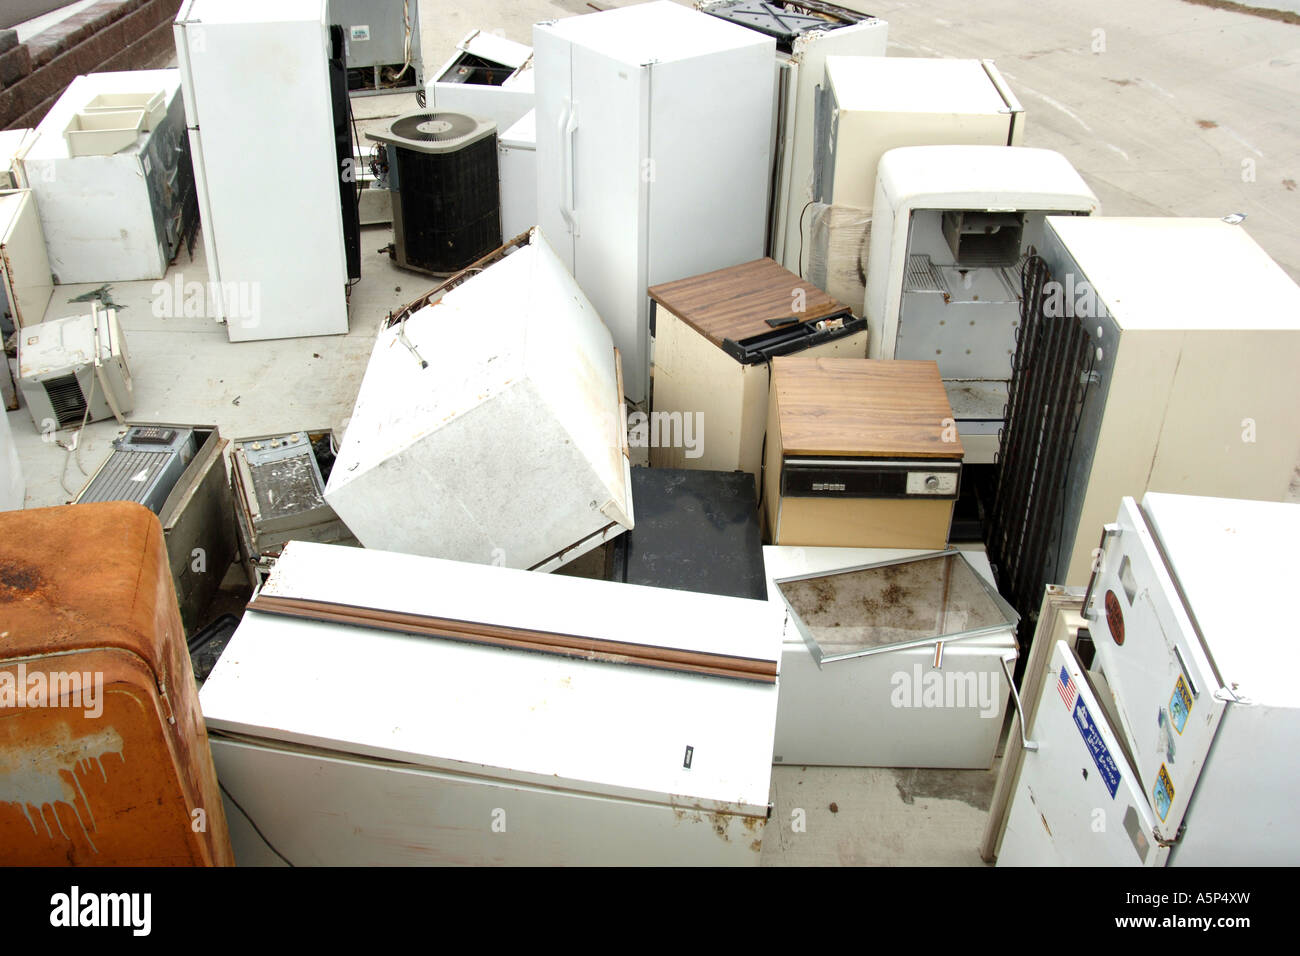 Disused Fridges at a recycling center. Stock Photo